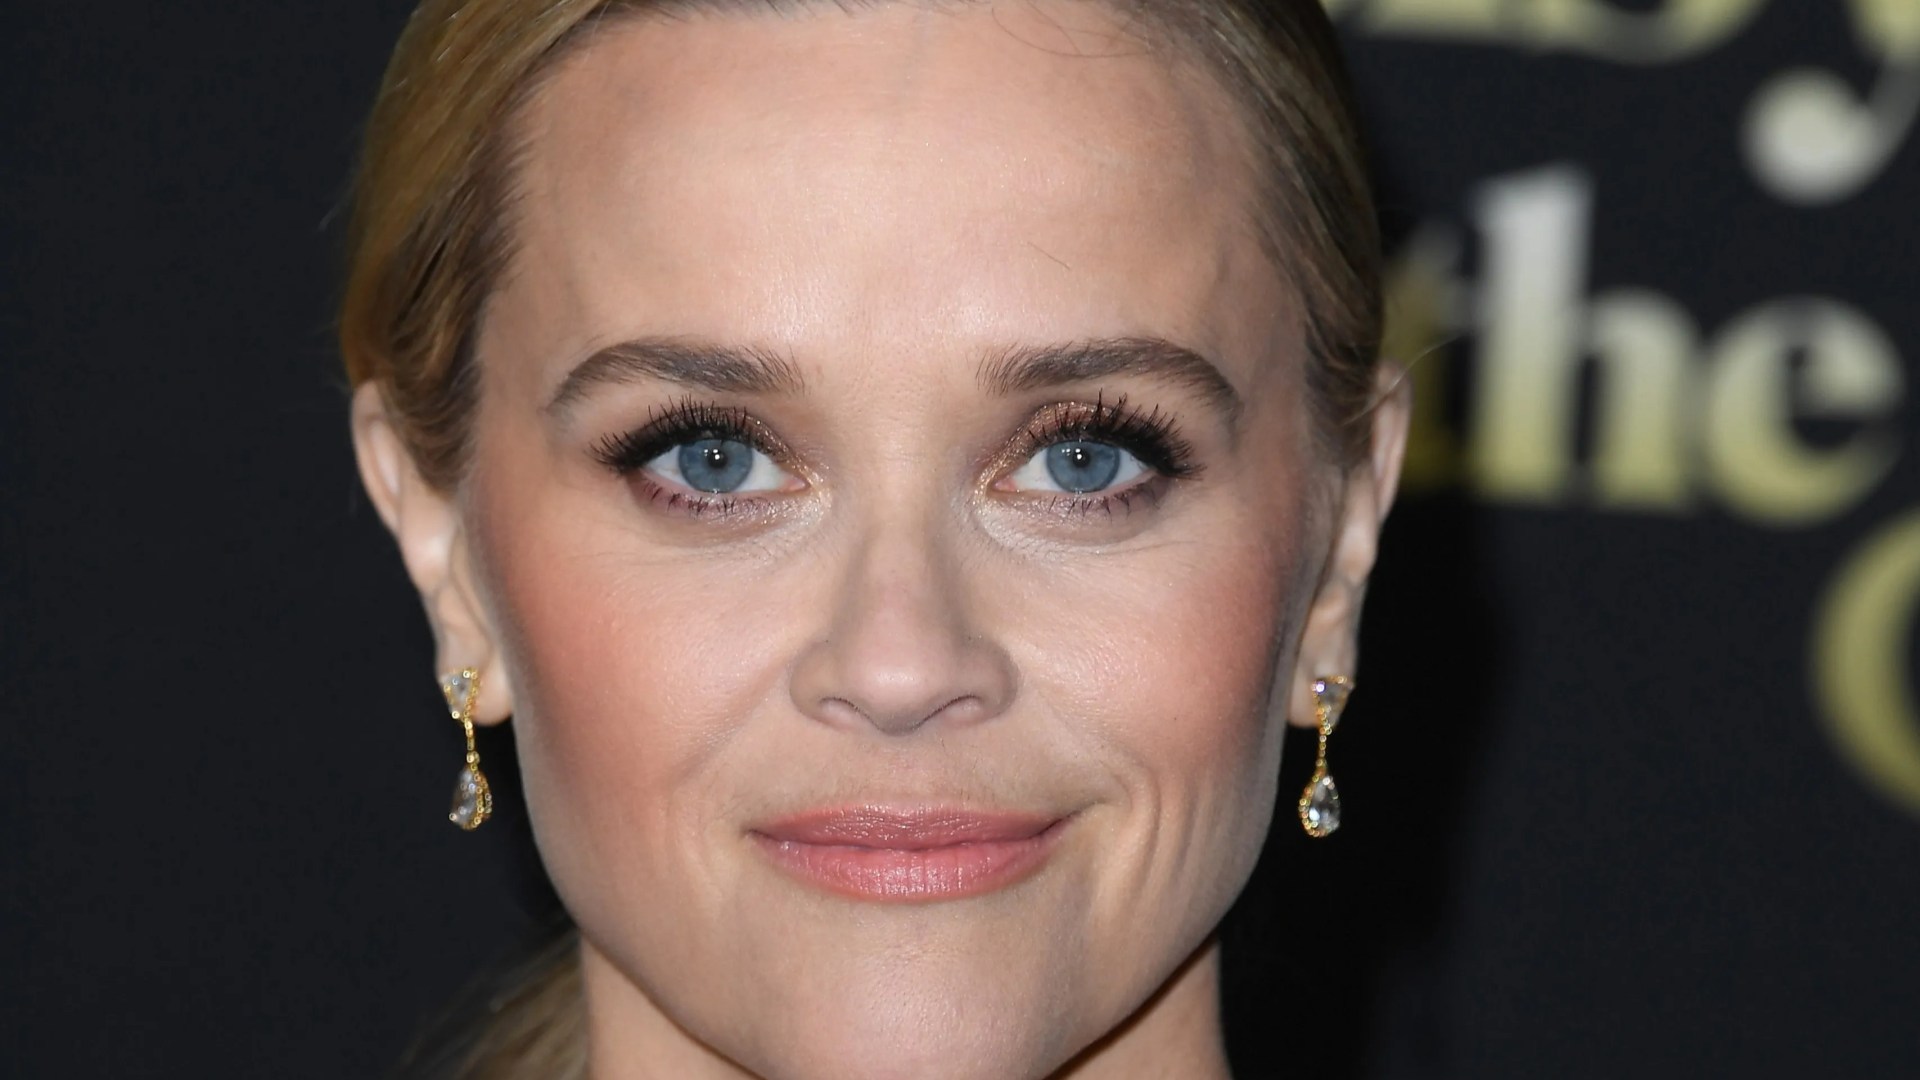 Unlock Reese Witherspoon’s Youthful Secret: Celebrity Hairdresser Reveals How to Look Younger Using Your Ears